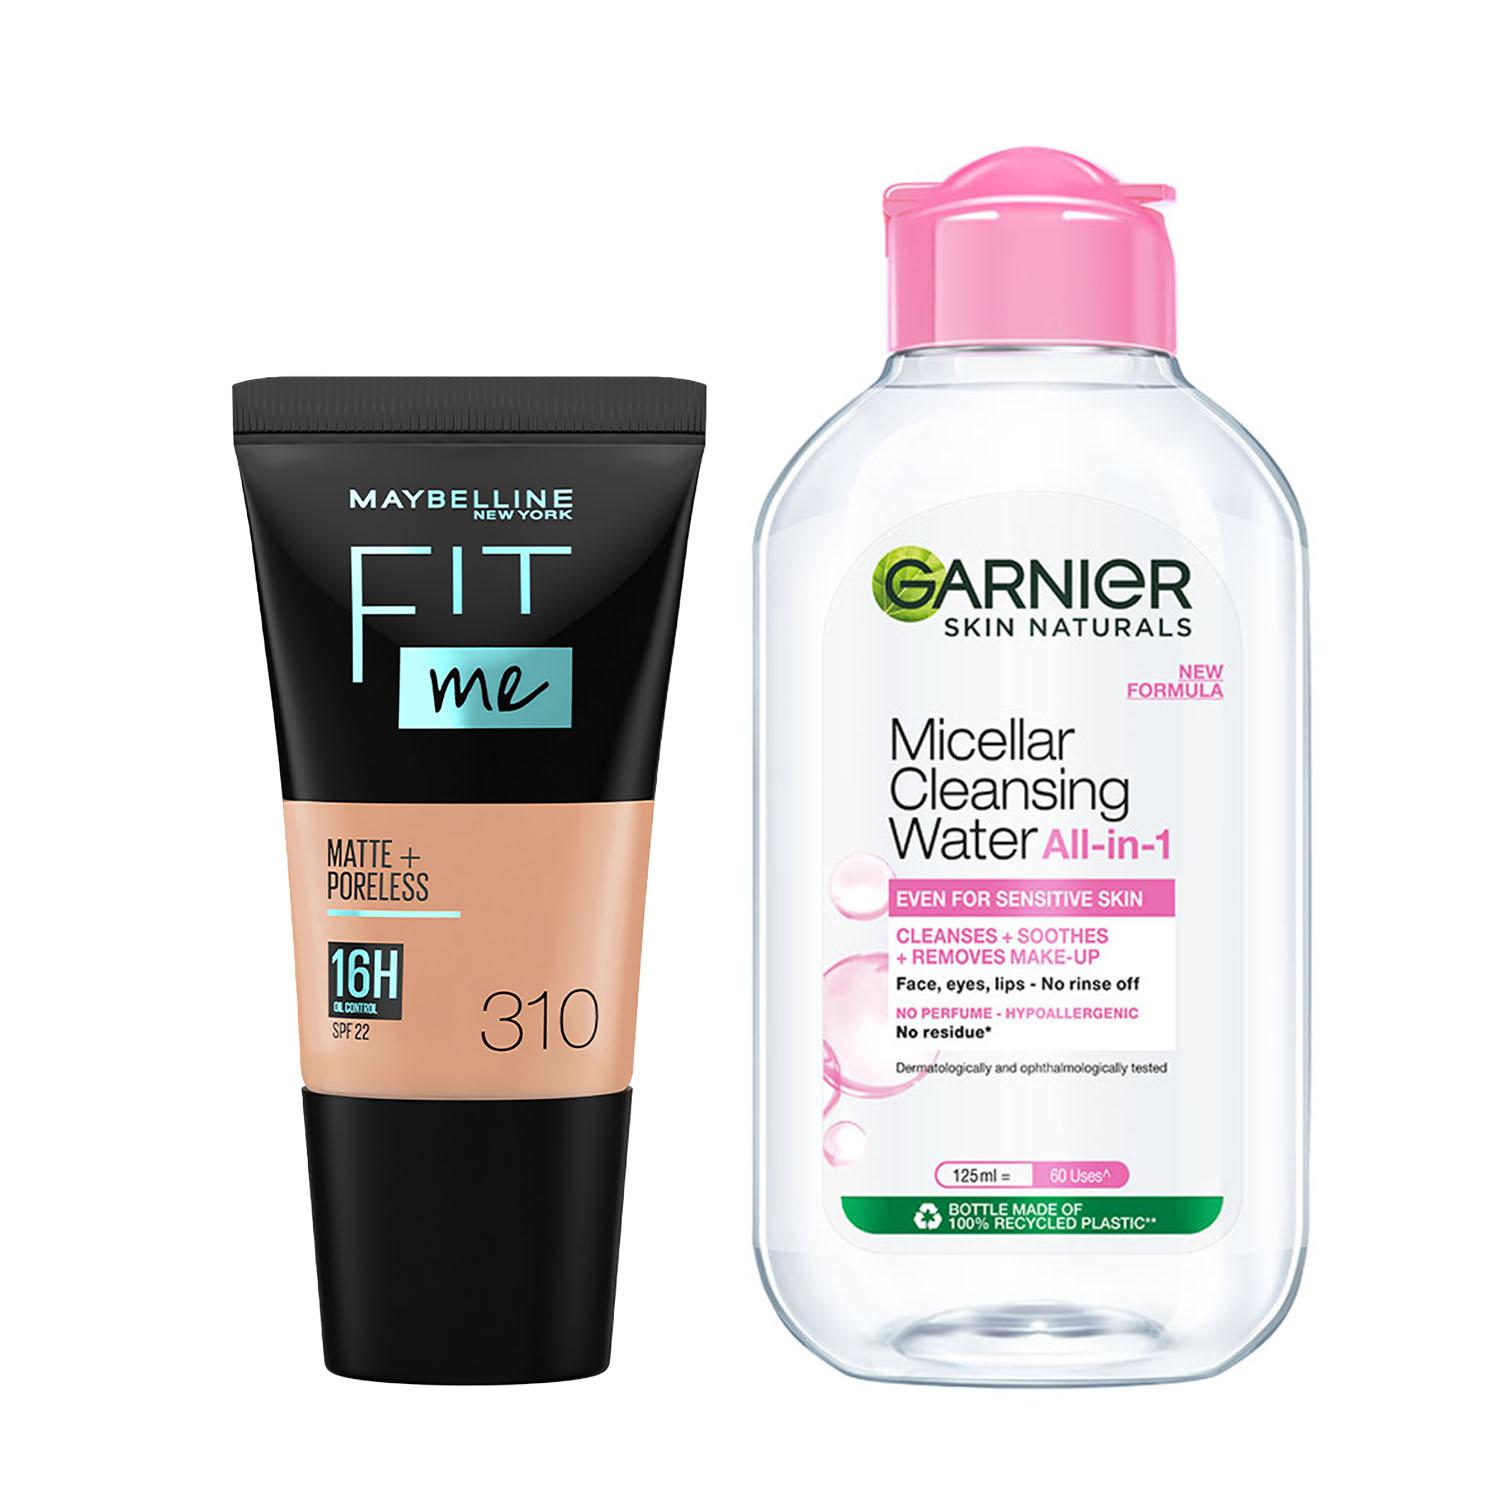 Maybelline New York | Maybelline New York Fit Me Foundation Tube, 310 with Garnier Micellar Cleansing Water Combo